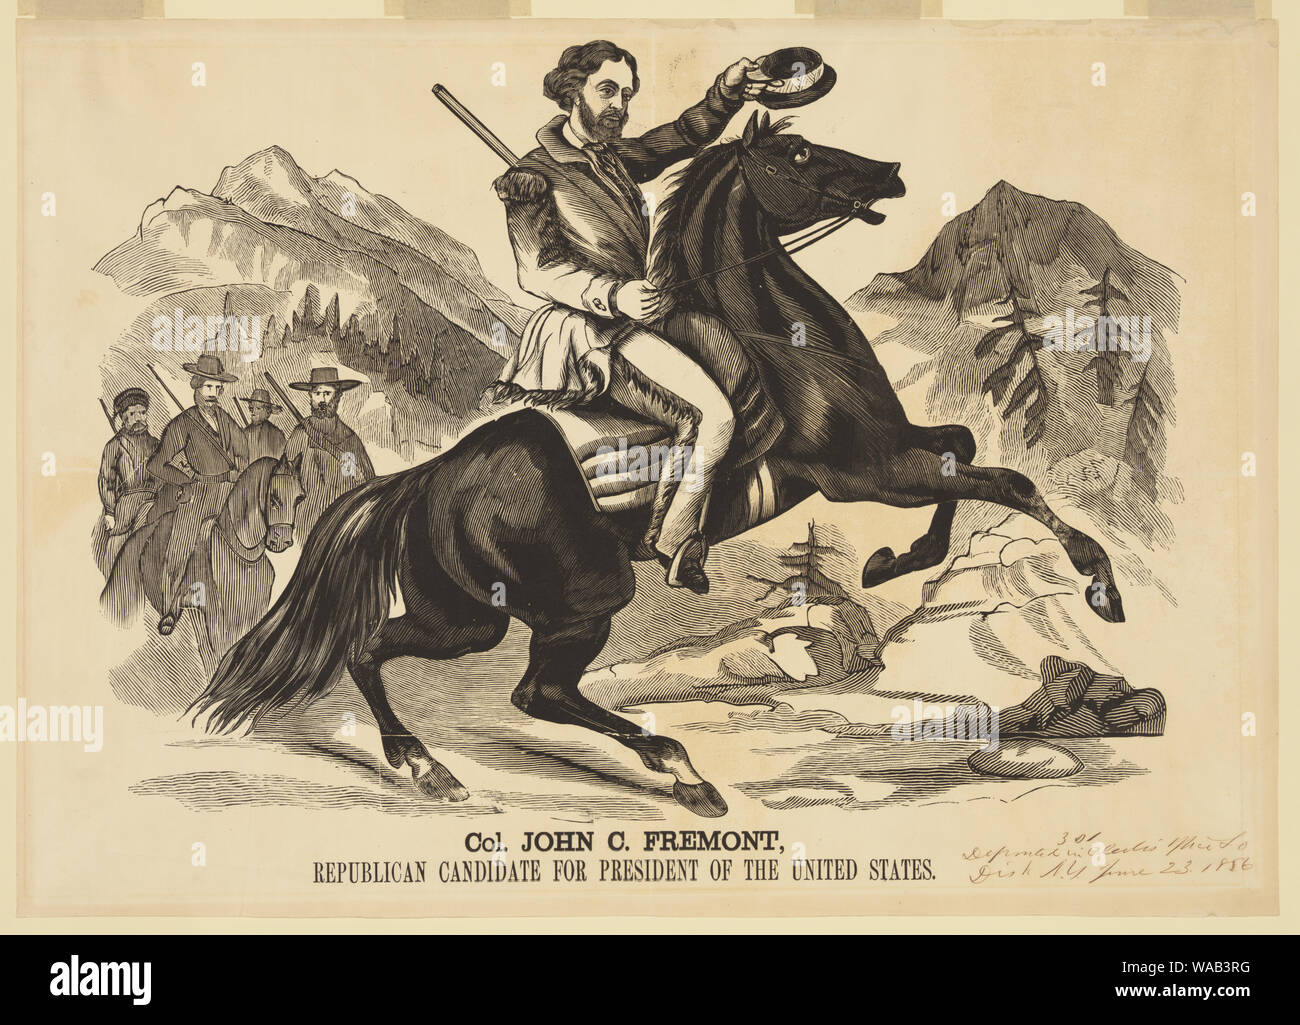 Col. John C. Fremont, Republican candidate for the President of the United States Abstract: Proof for a large woodcut banner or poster for Republican presidential candidate John C. Fremont. Fremont, a distinguished soldier and explorer, is mounted on a rearing horse in a mountain setting. Dressed in buckskins and with a rifle slung over his shoulder, he waves his cap in the air. Four other armed frontiersmen, also on horseback, are visible on the left. Stock Photo